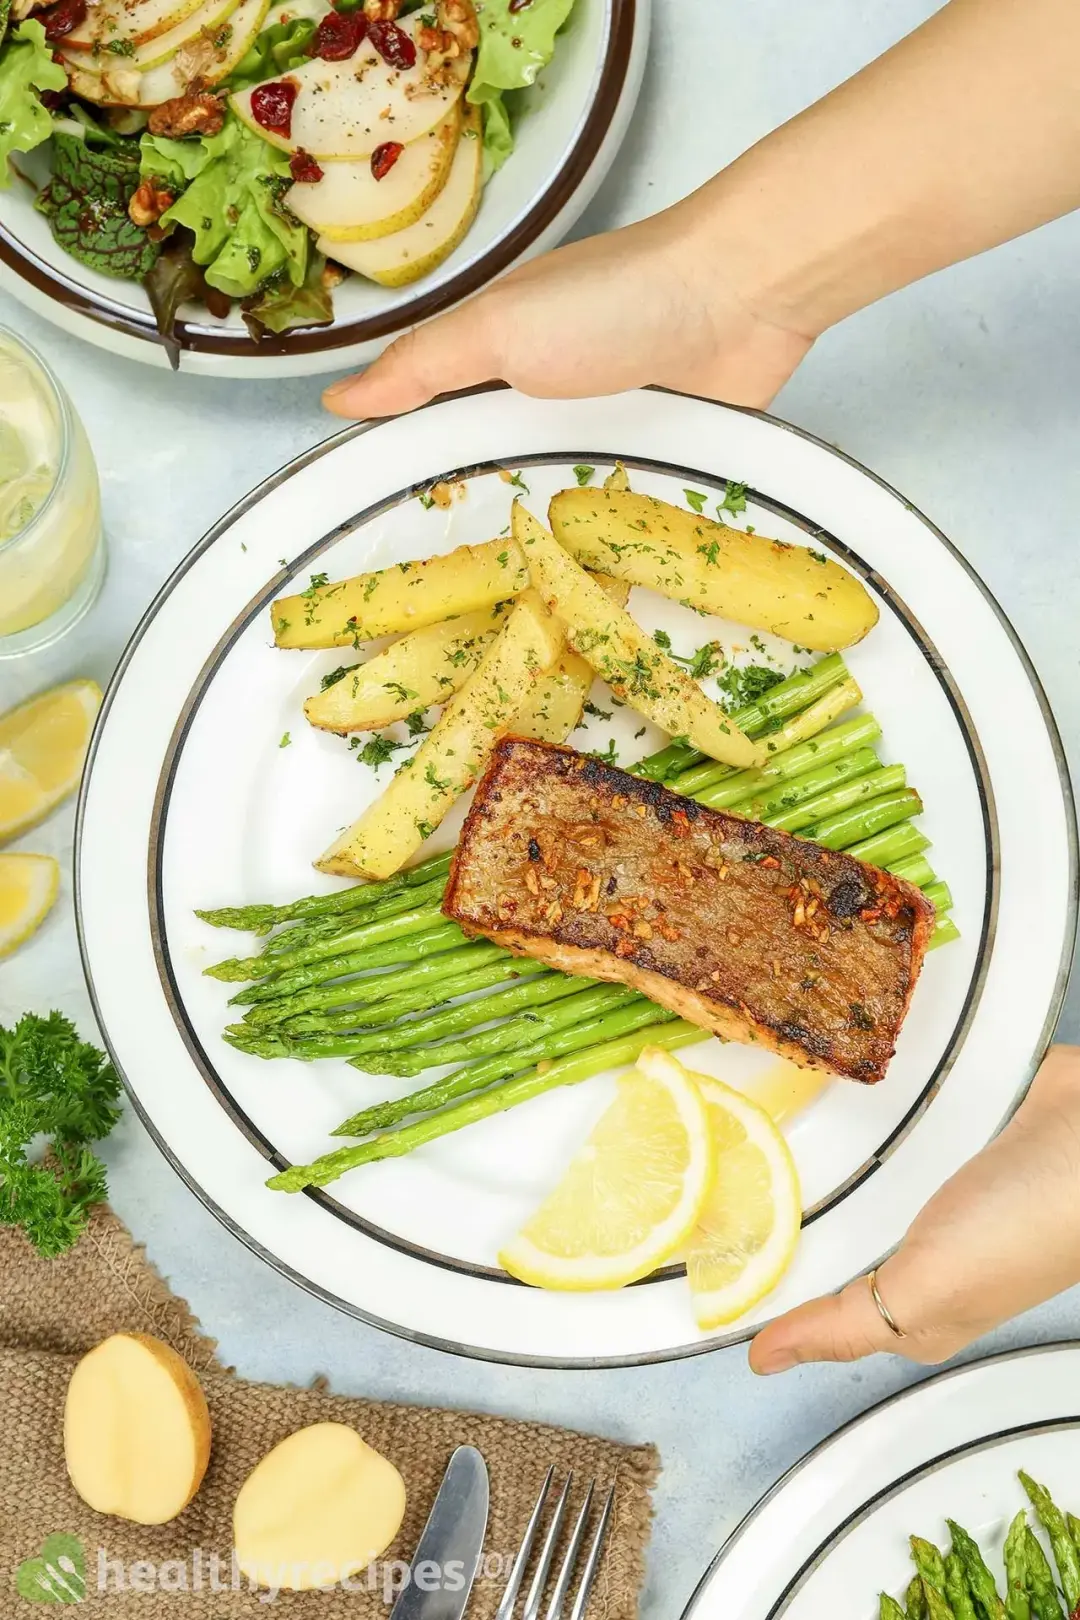 Two hands holding a plate containing a piece of pan-seared salmon, asparagus, potato wedges, and lemon slices